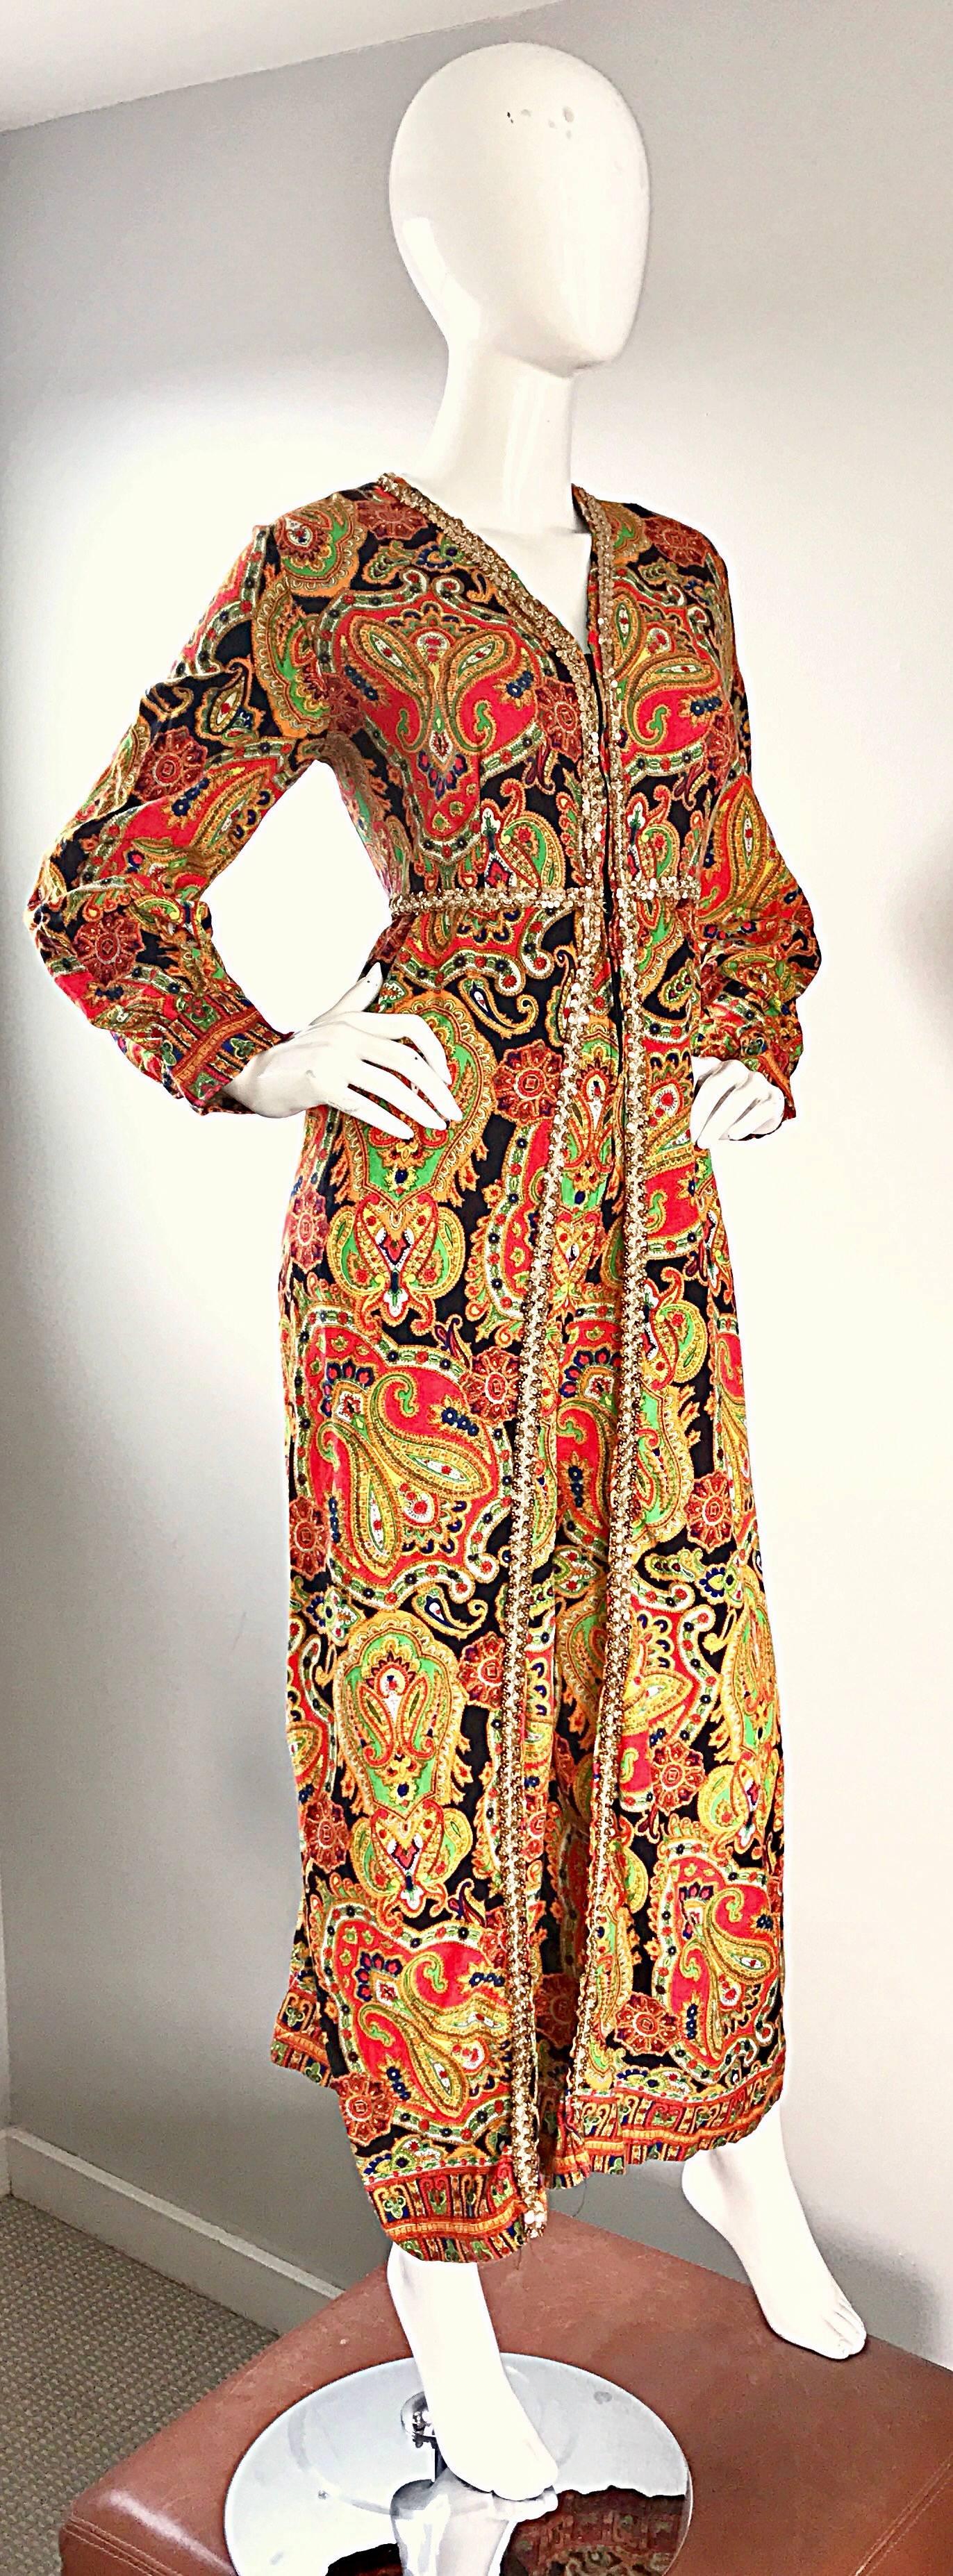 Brown Amazing 1970s Psychedelic Paisley Gold Sequin Long Sleeve Vintage 70s Jumpsuit